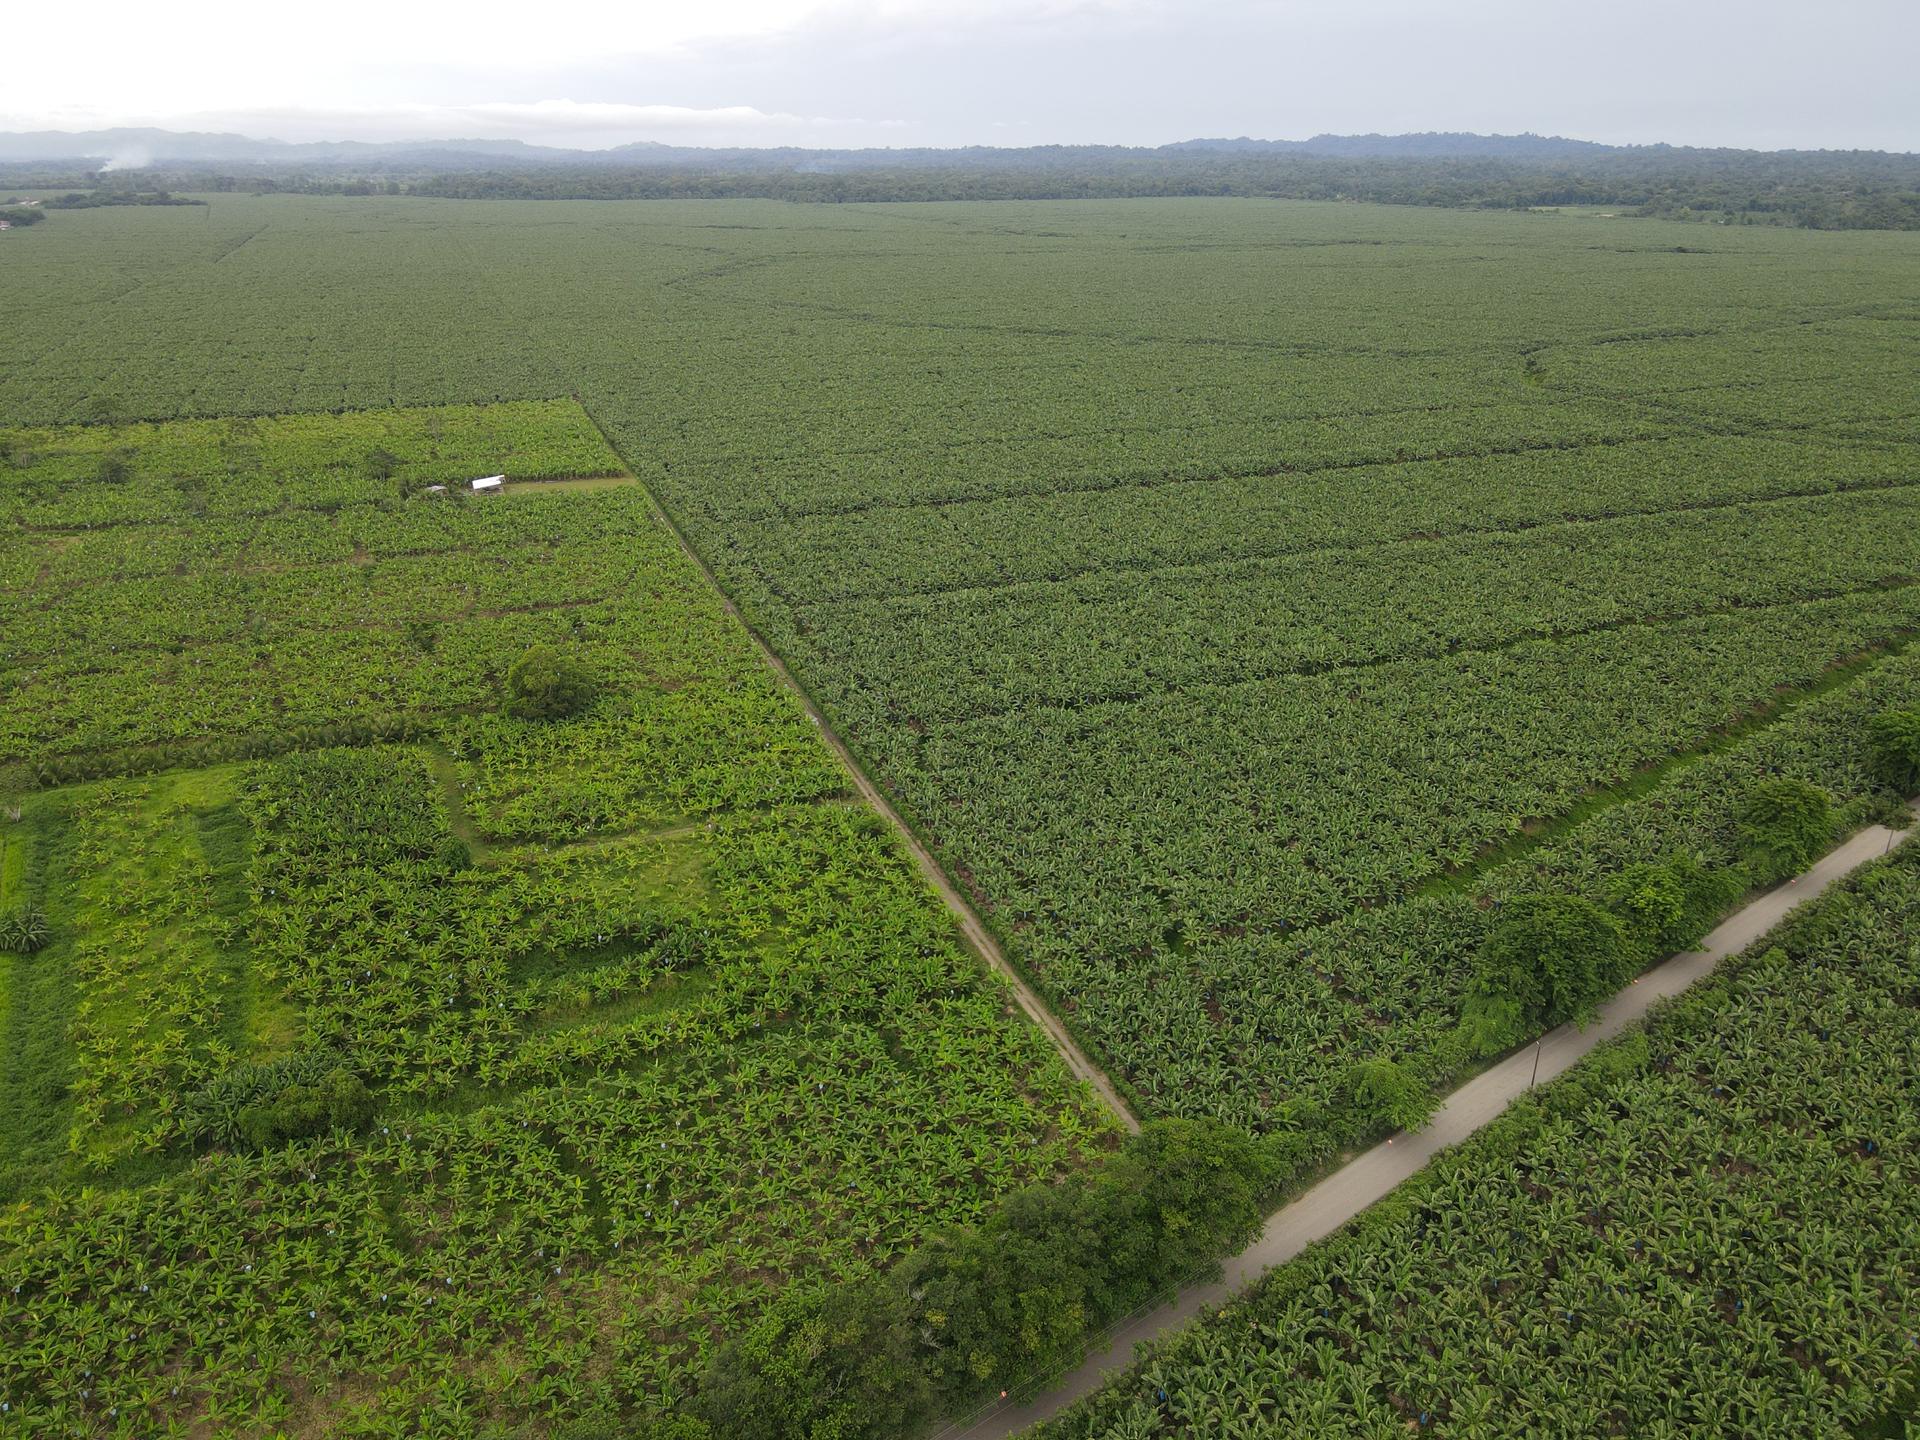 Banana plantations stretch for miles on the Southern Caribbean coast of Costa Rica, near the border with Panama.